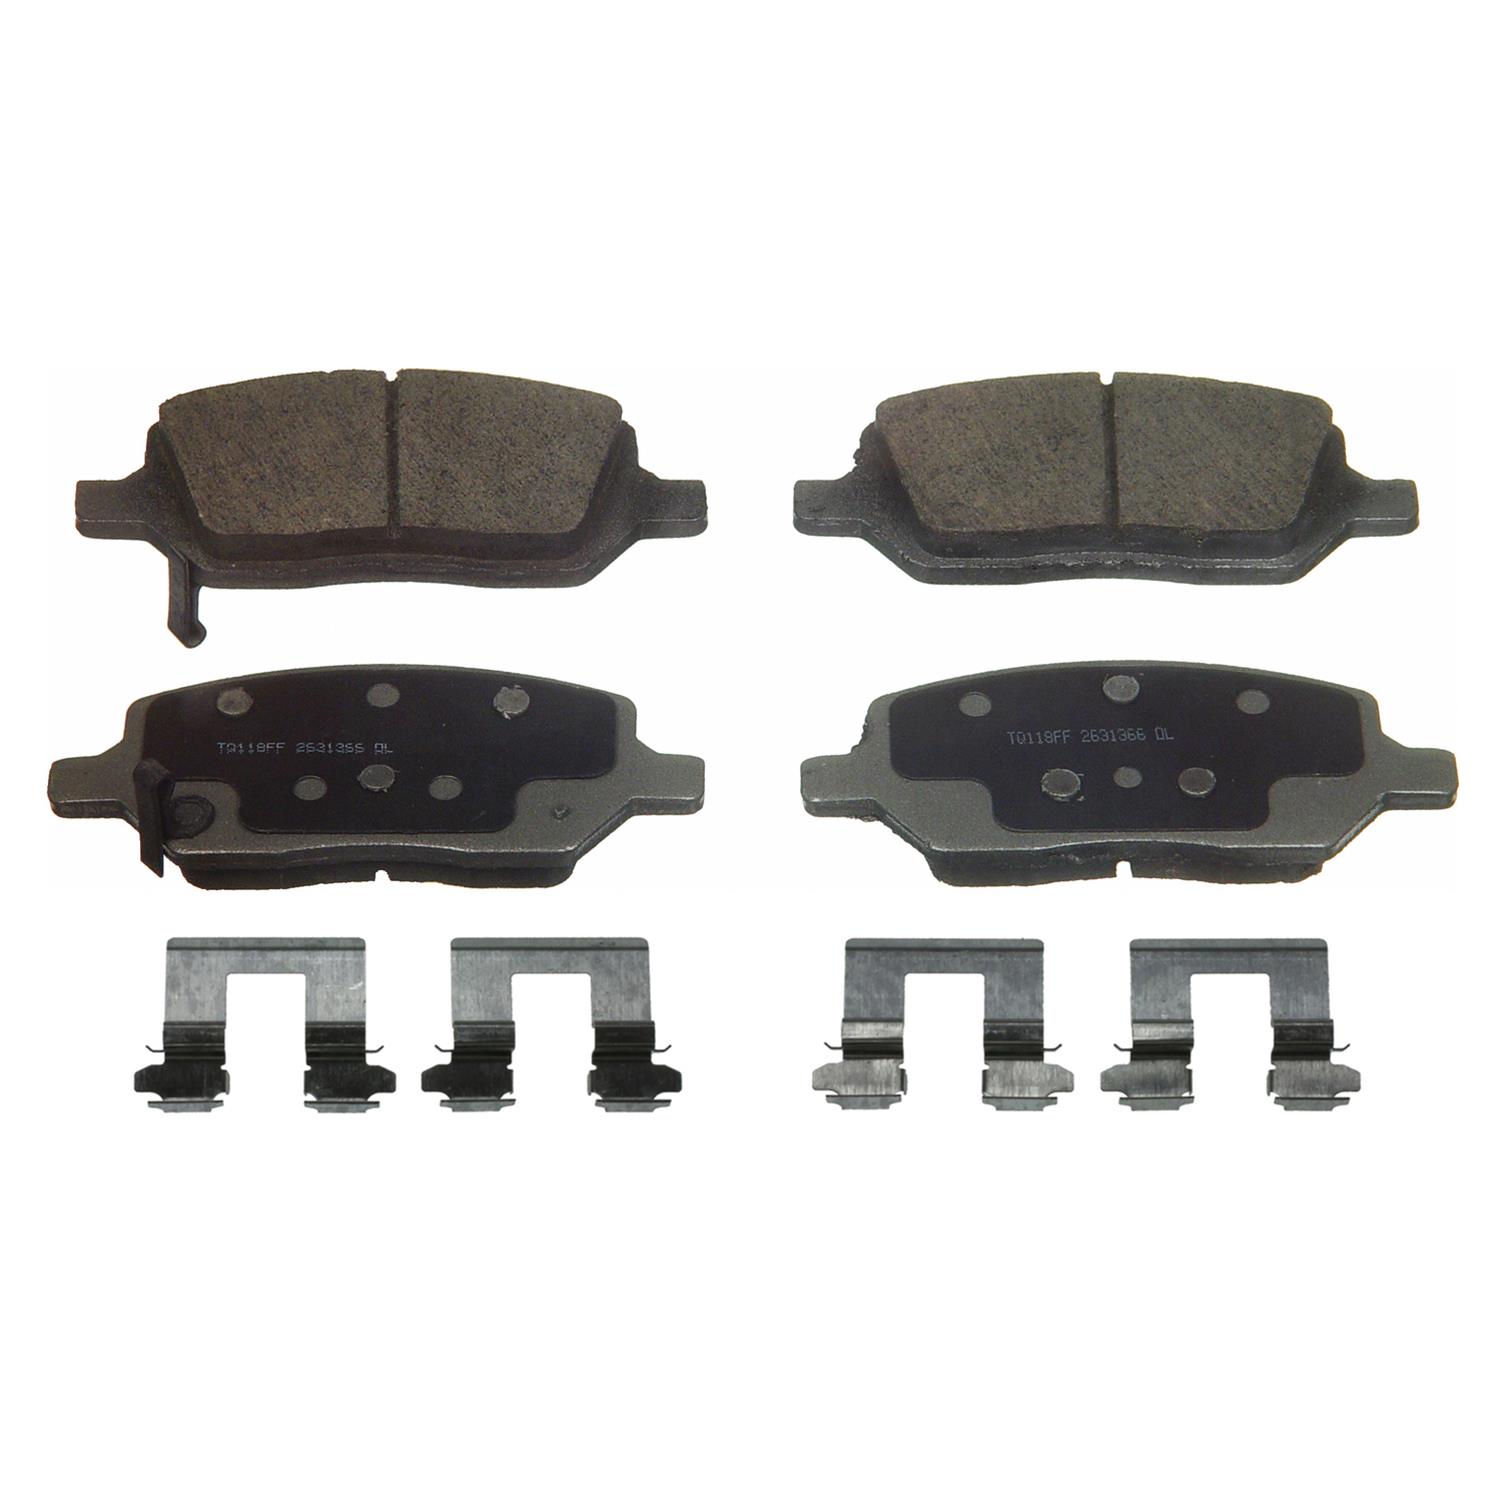 Wagner QC1679 ThermoQuiet Rear Brake Pads 